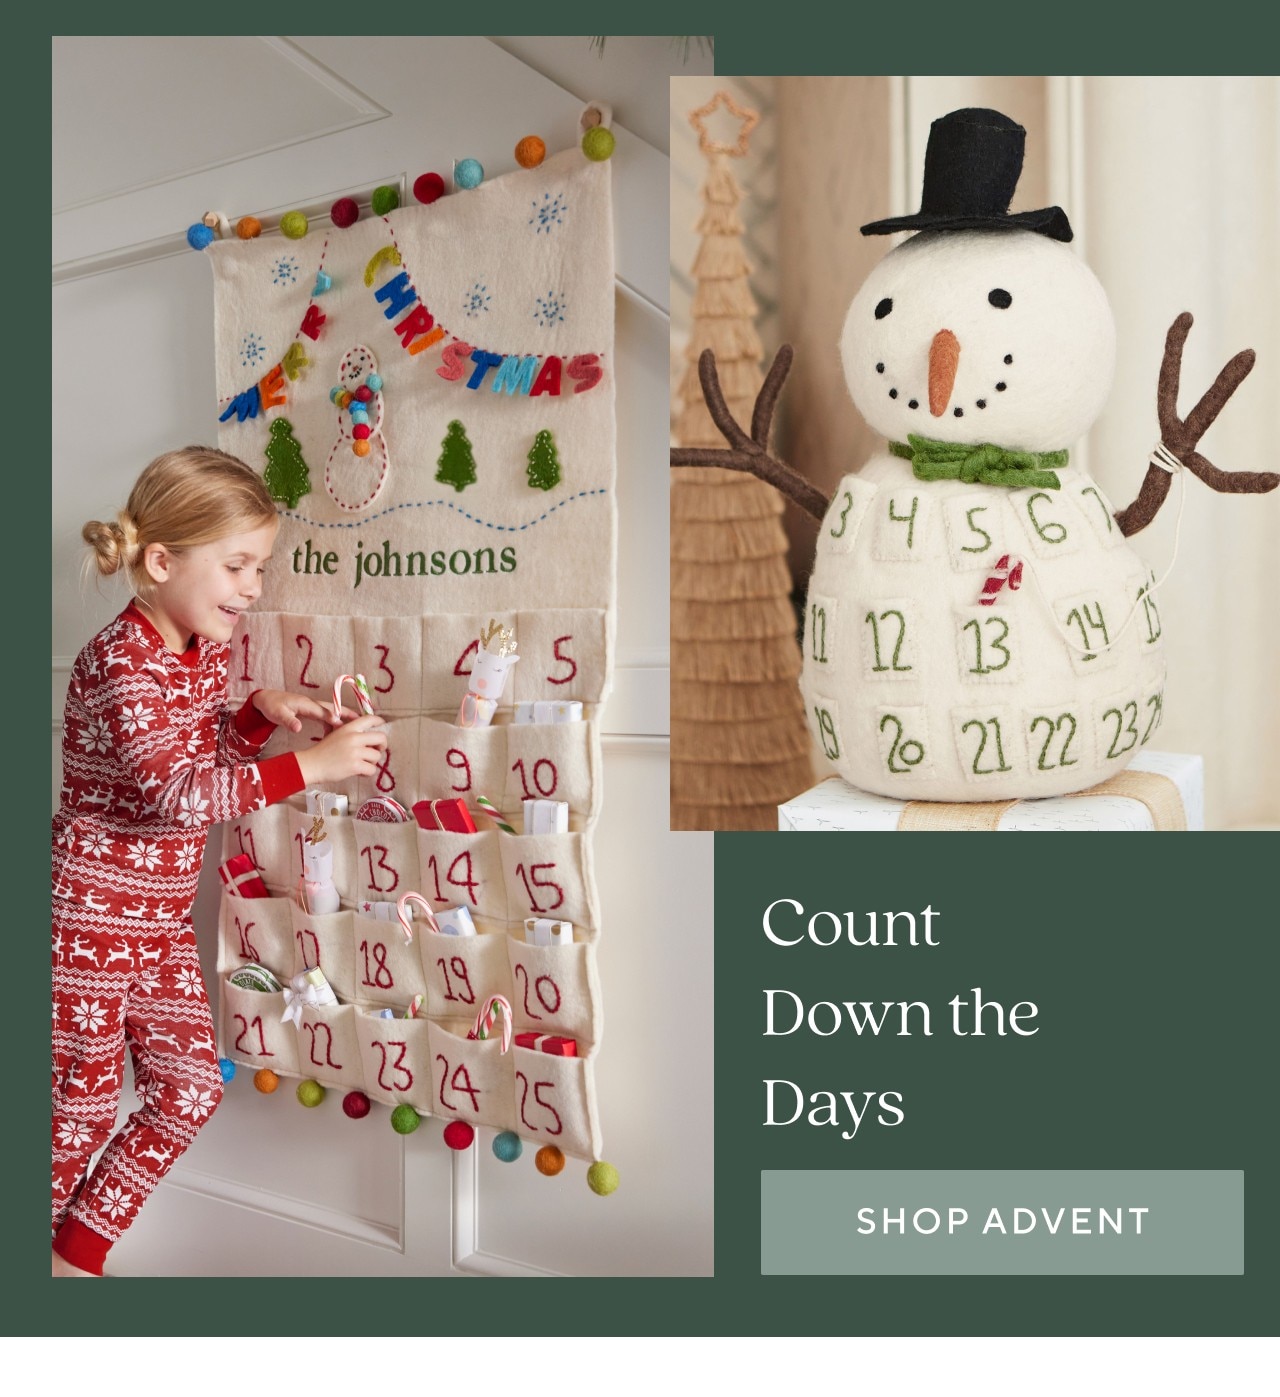 COUNT DOWN THE DAYS - SHOP ADVENT